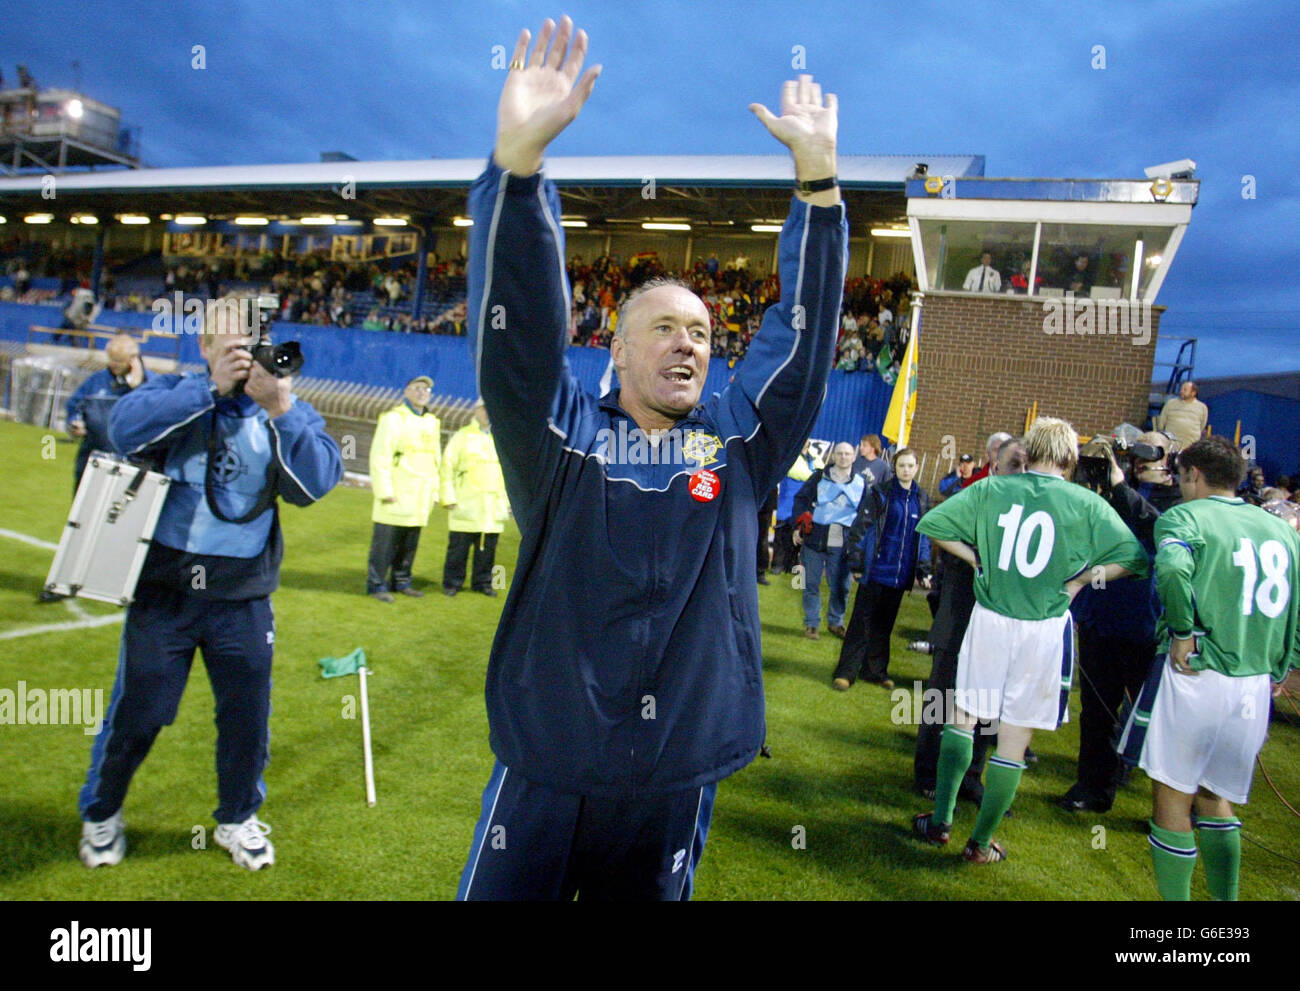 Northern Ireland manager Sammy McIlroy, salutes the crowd after a standing ovation,his team held Spain to a draw at windsor park in Belfast Northern Ireland. N.Ireland are hoping for a win against Spain in the 2004 euro Qualifier. Stock Photo